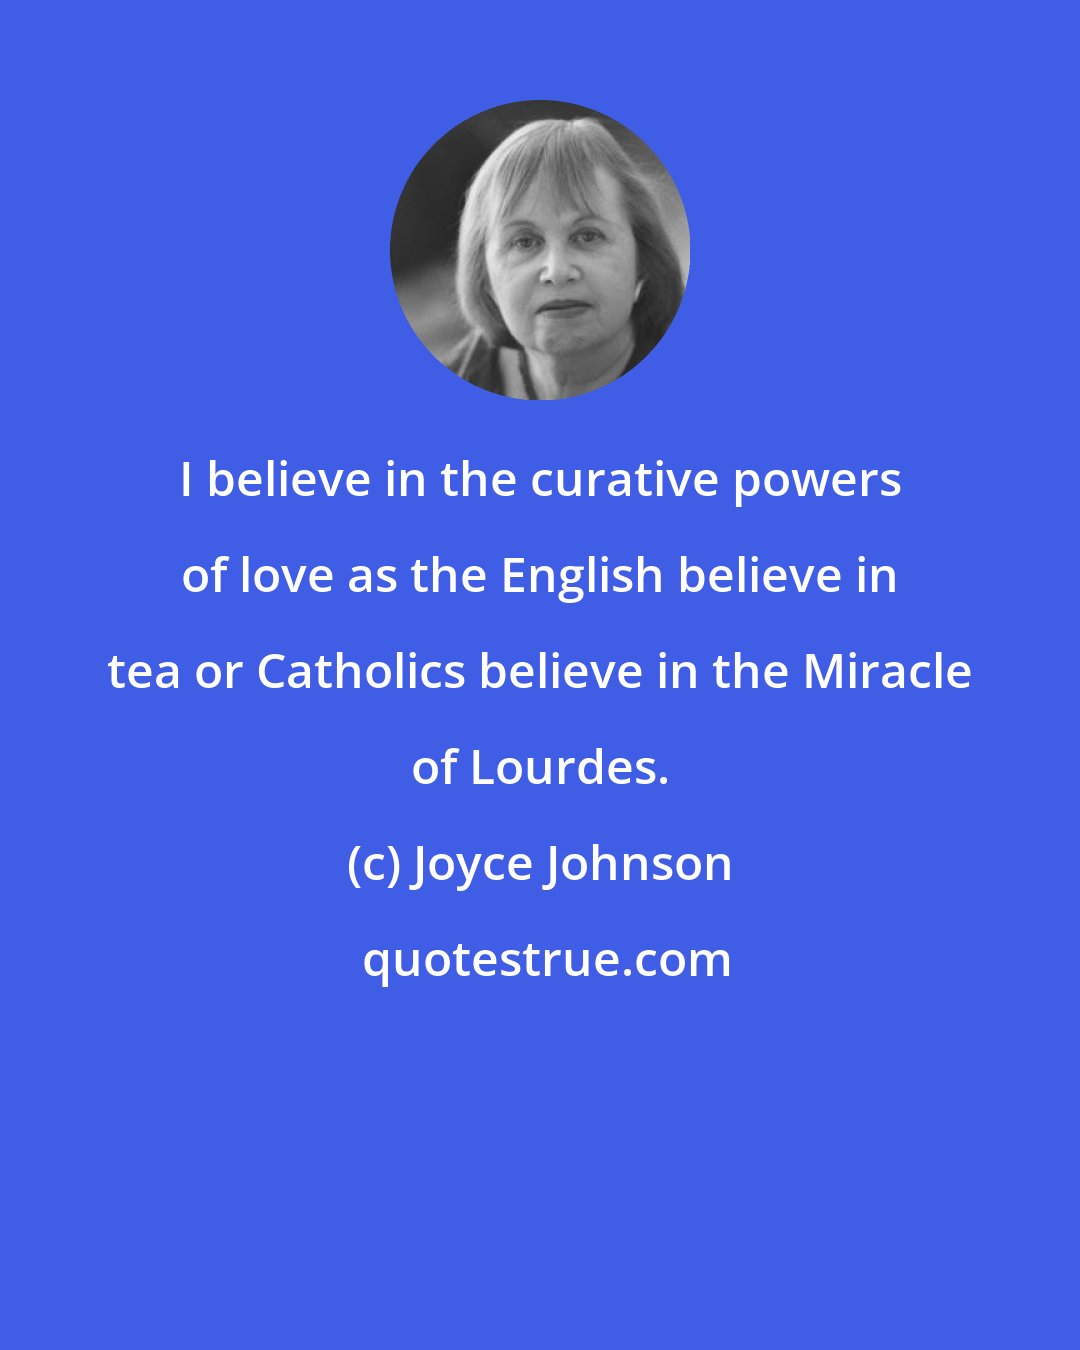 Joyce Johnson: I believe in the curative powers of love as the English believe in tea or Catholics believe in the Miracle of Lourdes.